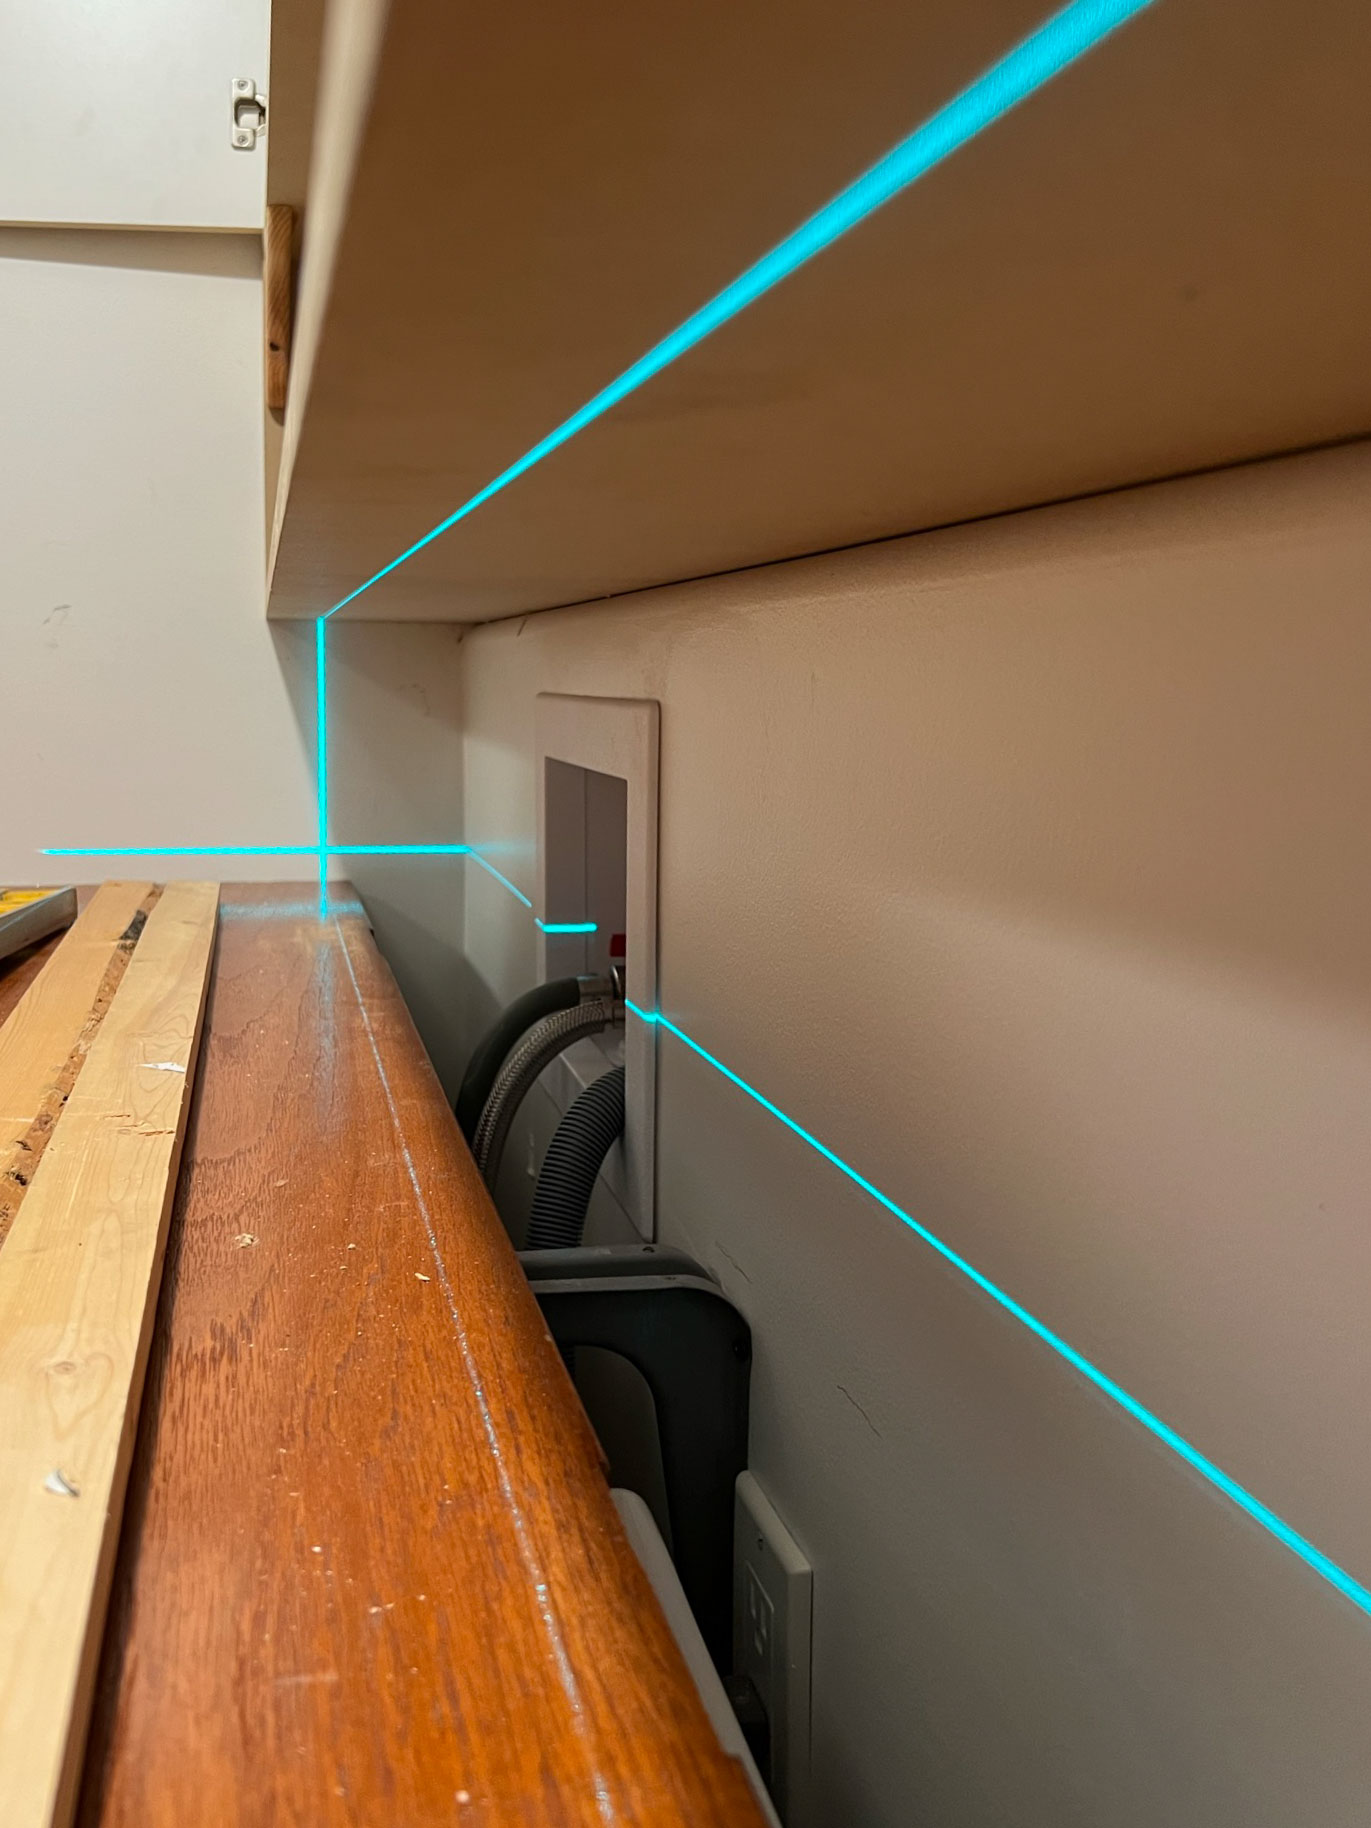 laser level projecting onto a counter and the underside of a shelf